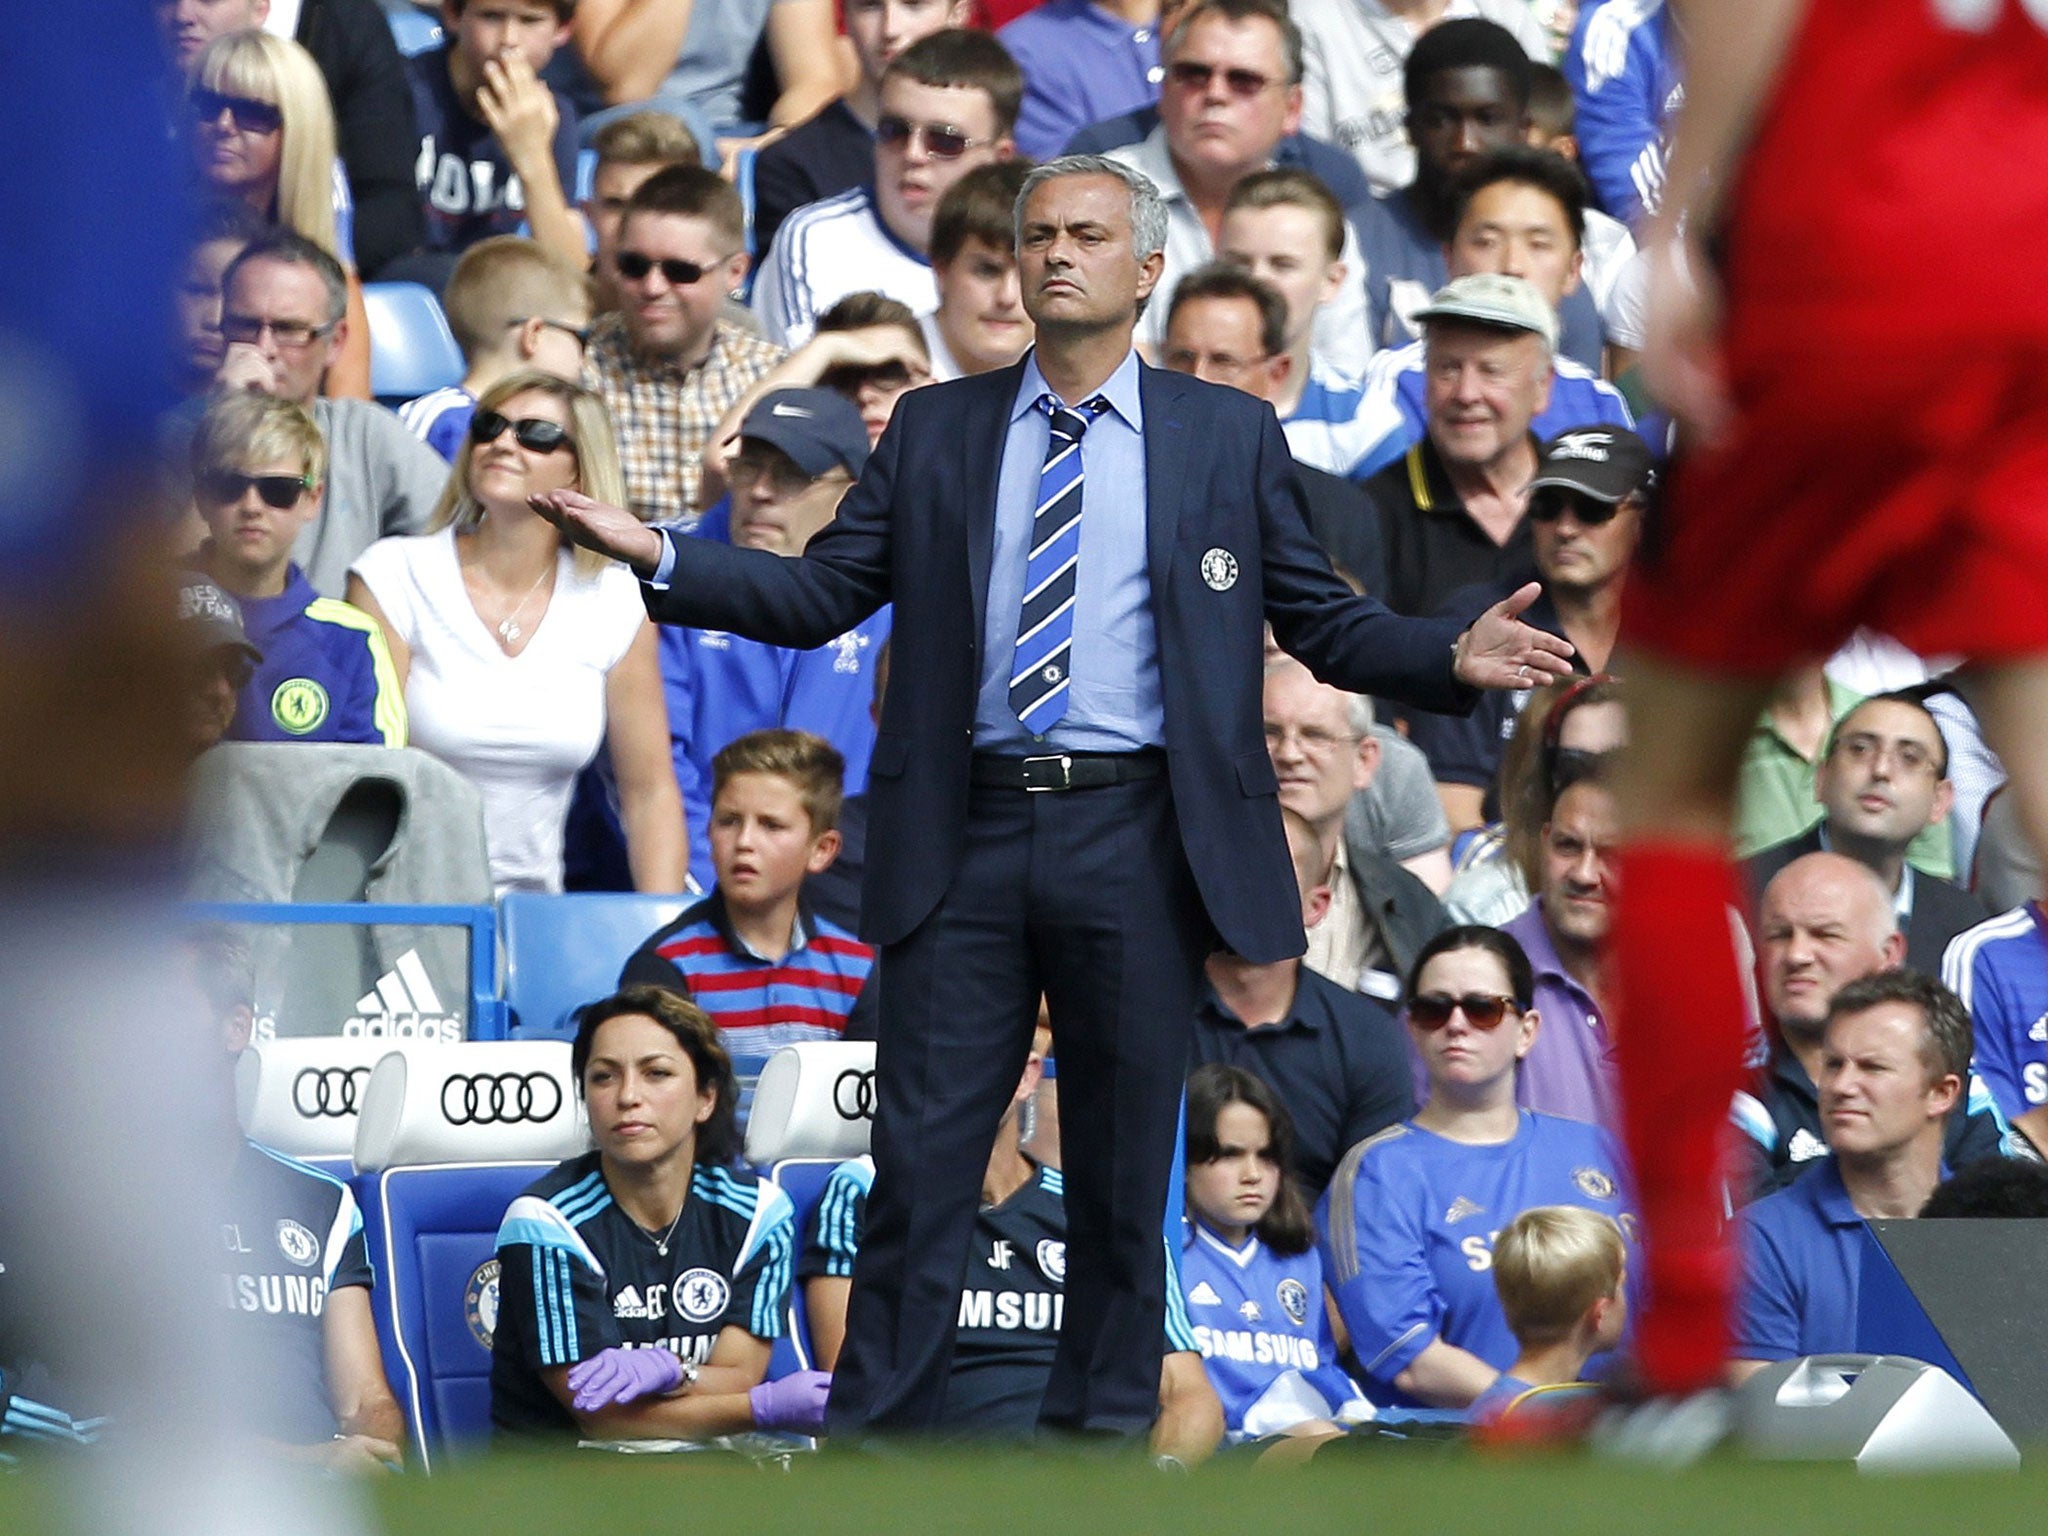 Chelsea manager Jose Mourinho was not impressed with his team's first-half performance